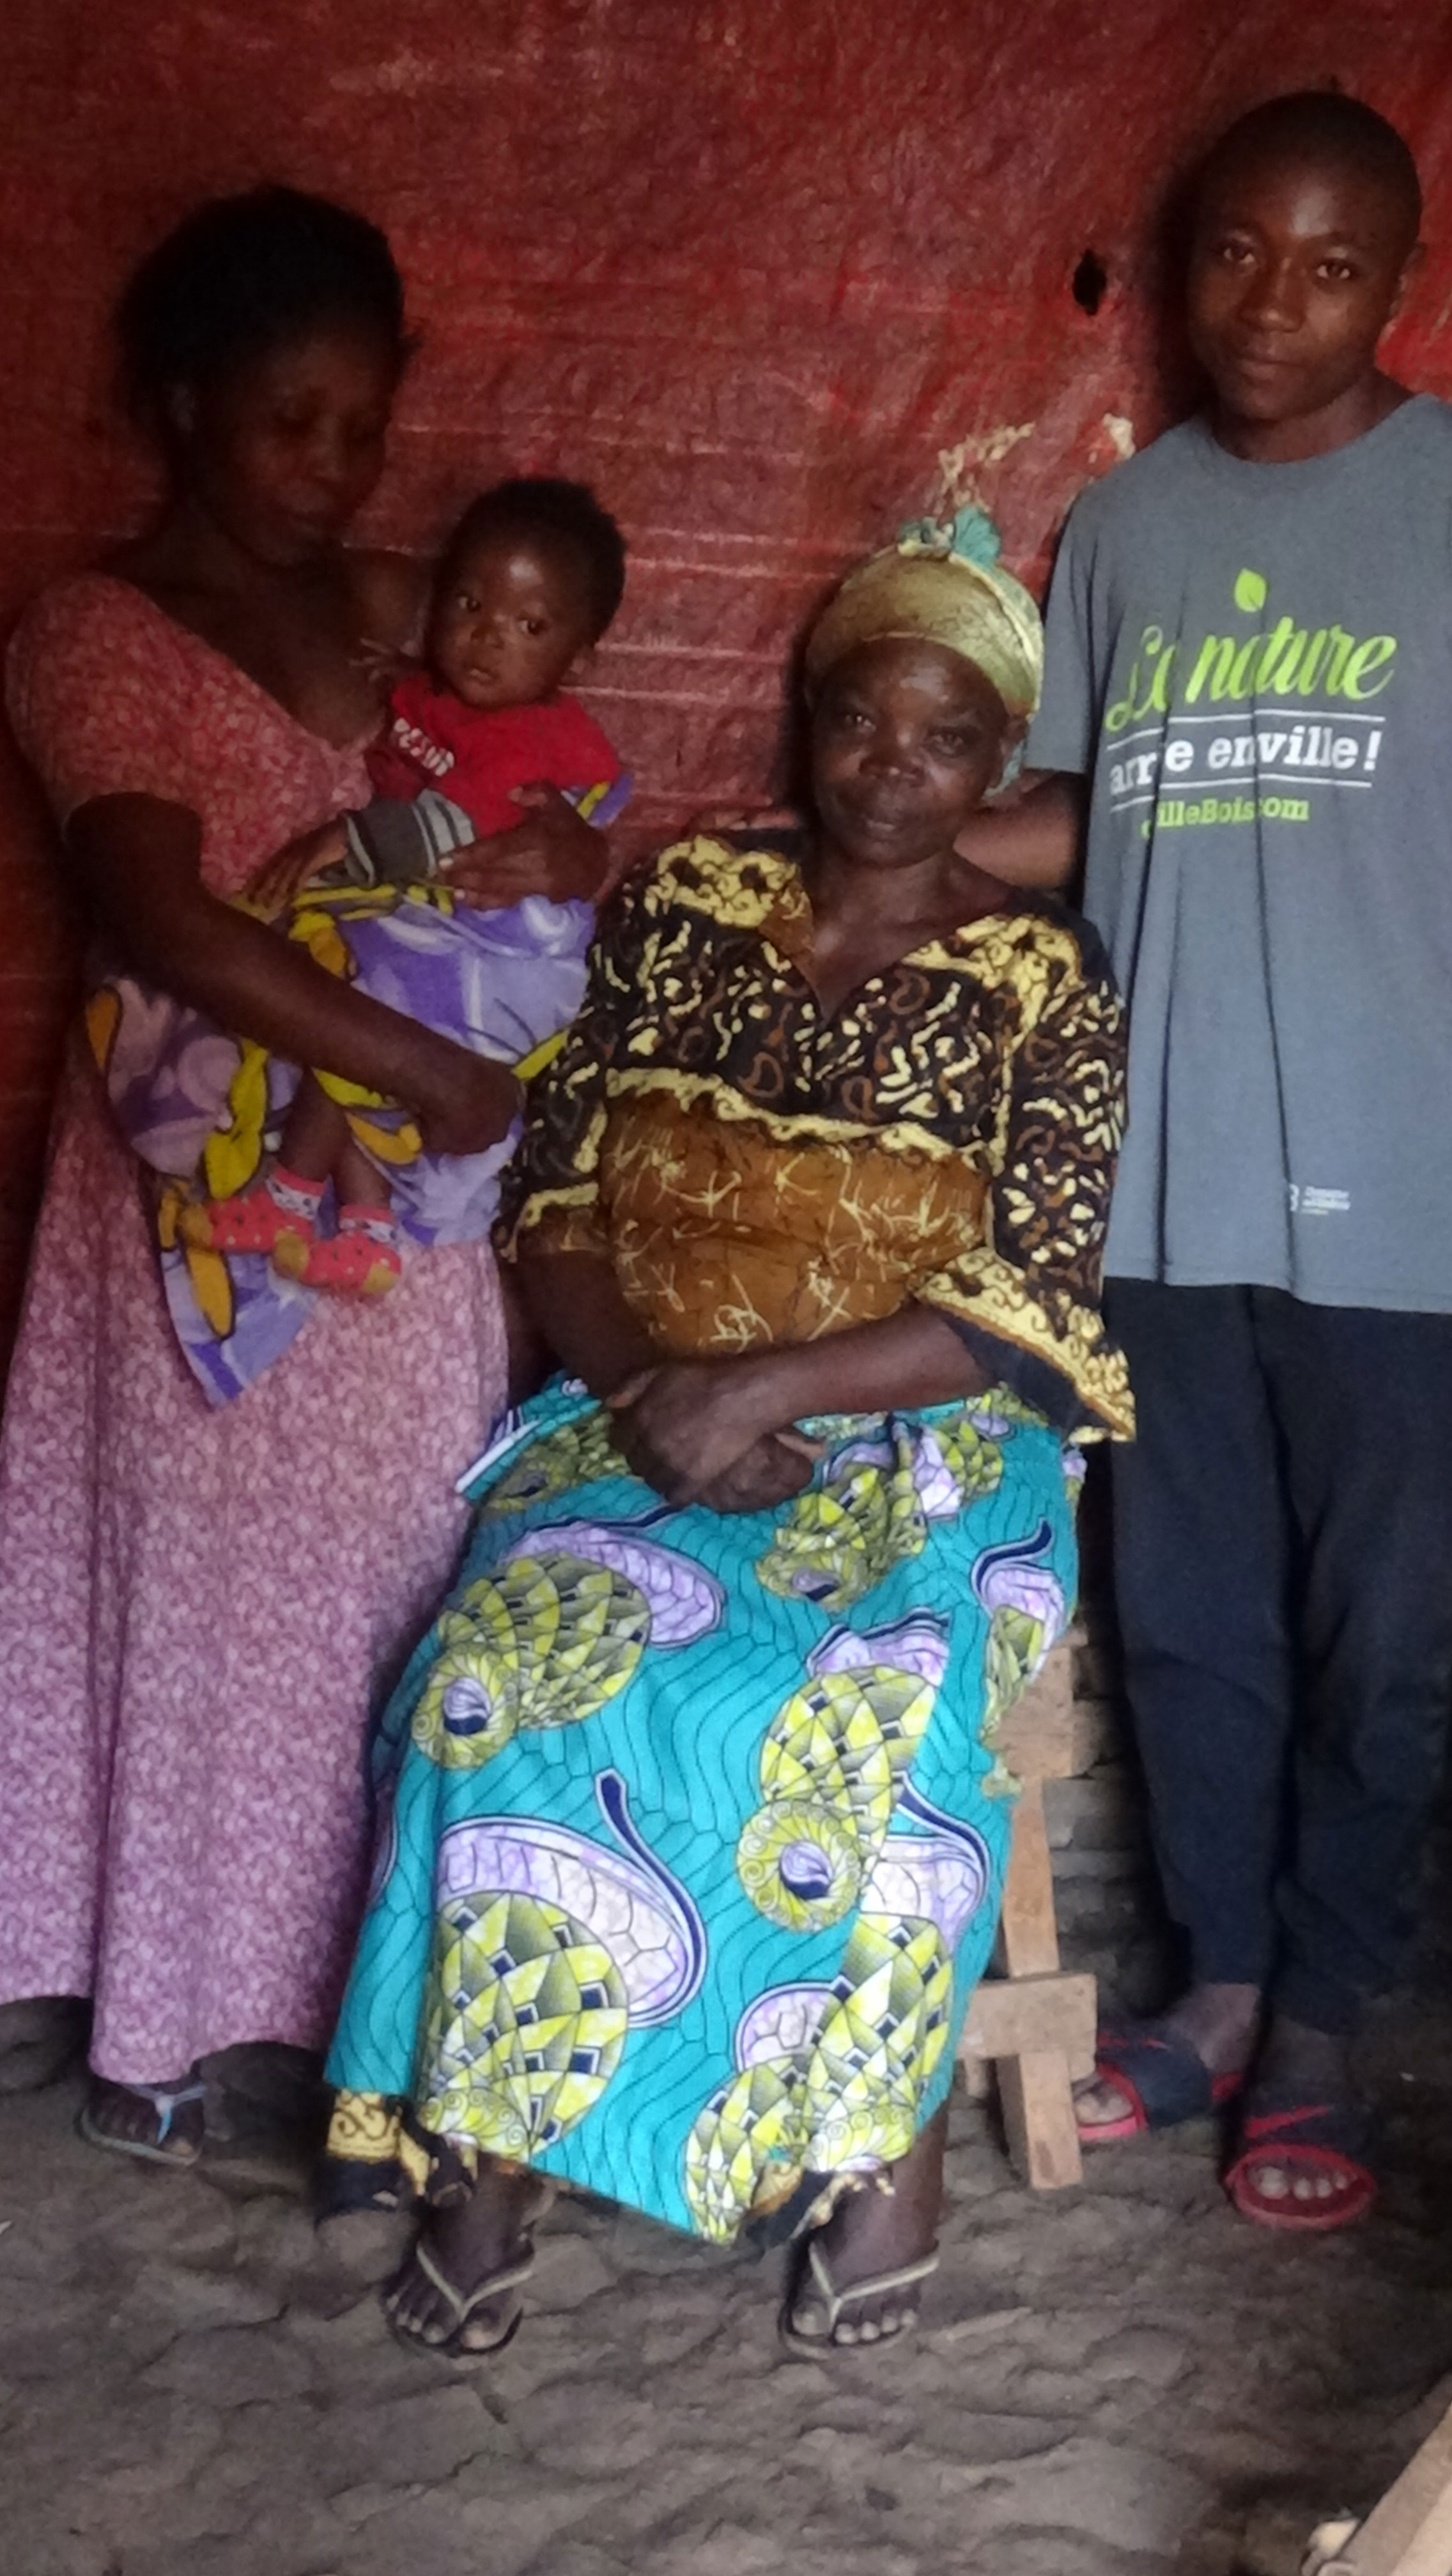 A widow in Bukavu opened her home to an unaccompanied boy and a young mother and her baby.